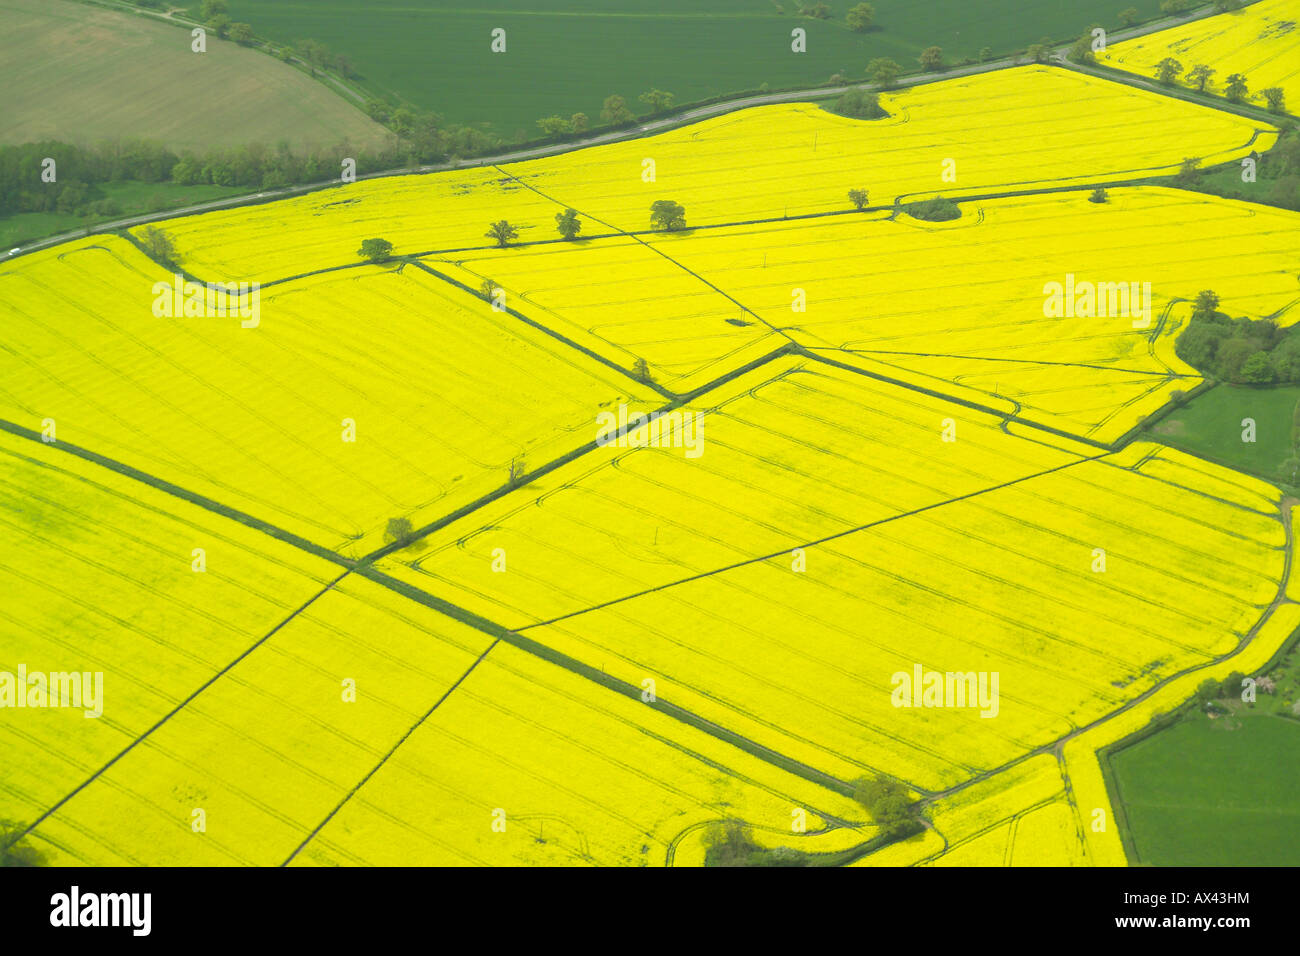 Aerial view of sevaral fields with a crop of oilseed rape growing in them, also known as rape or rapeseed Stock Photo